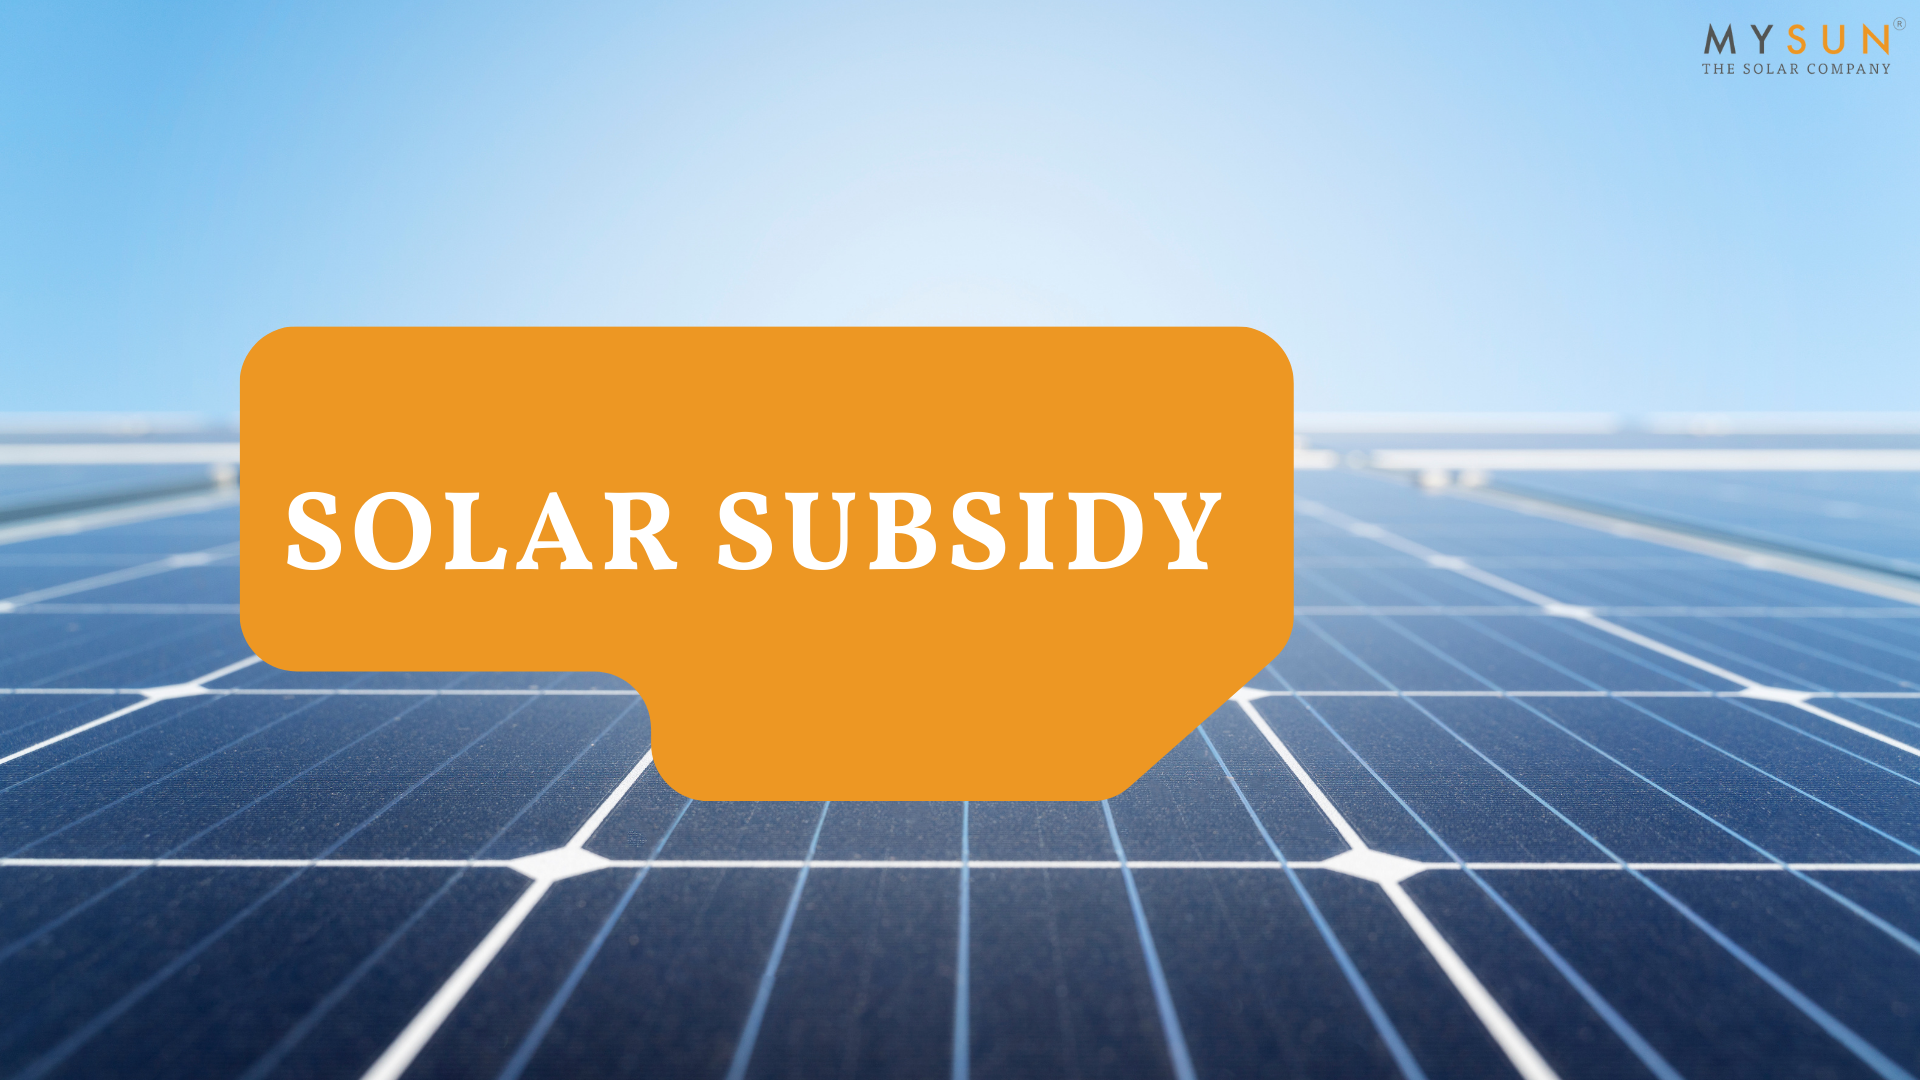 big-announcement-on-solar-subsidy-for-homes-rediscover-the-sun-with